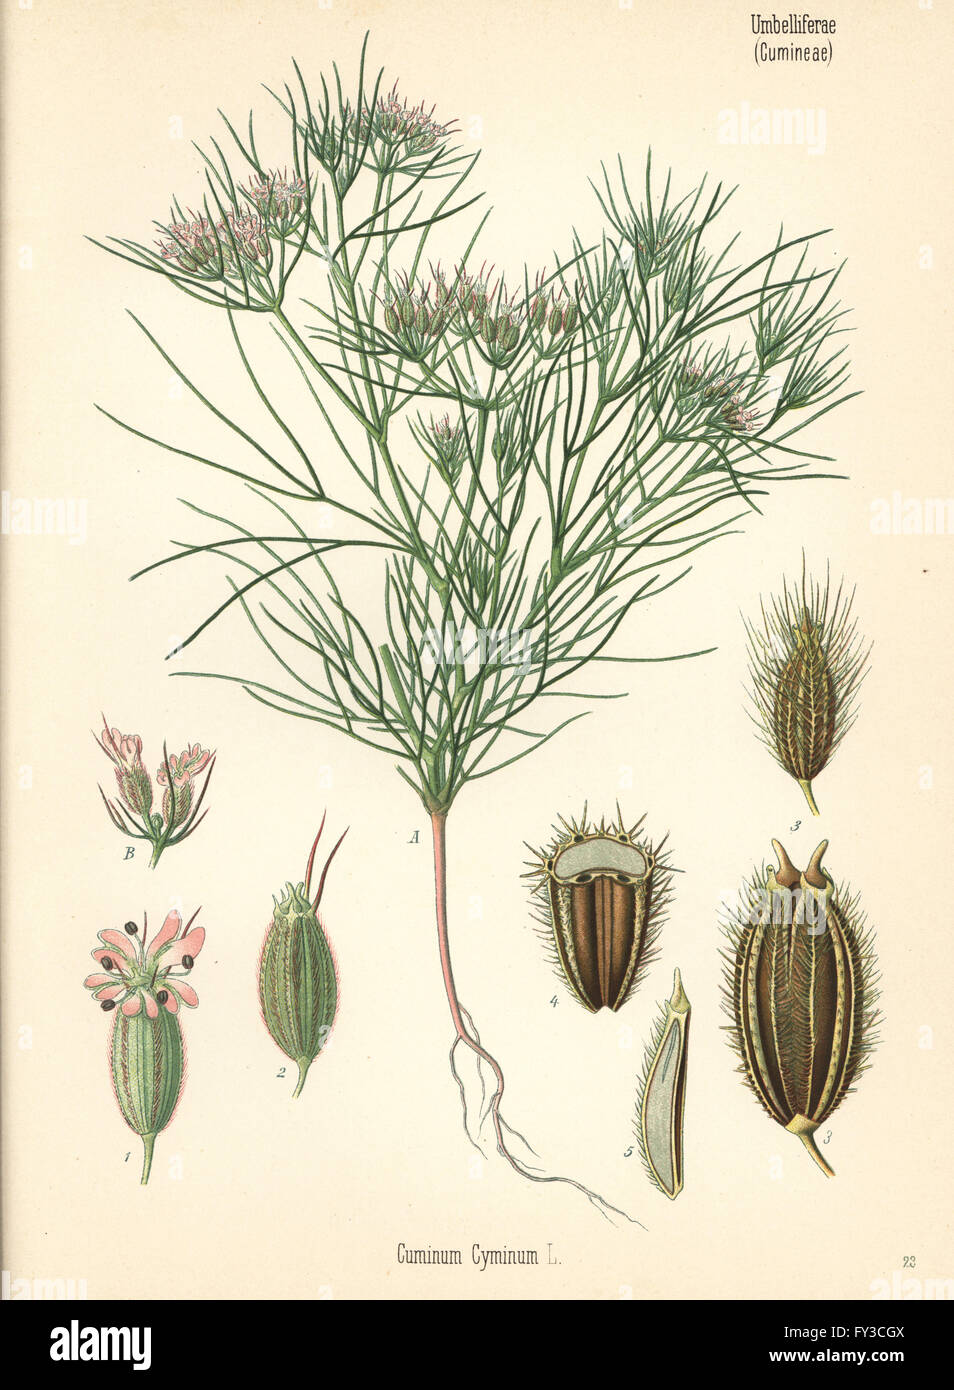 Cumin, Cuminum cyminum. Chromolithograph after a botanical illustration from Hermann Adolph Koehler's Medicinal Plants, edited by Gustav Pabst, Koehler, Germany, 1887. Stock Photo